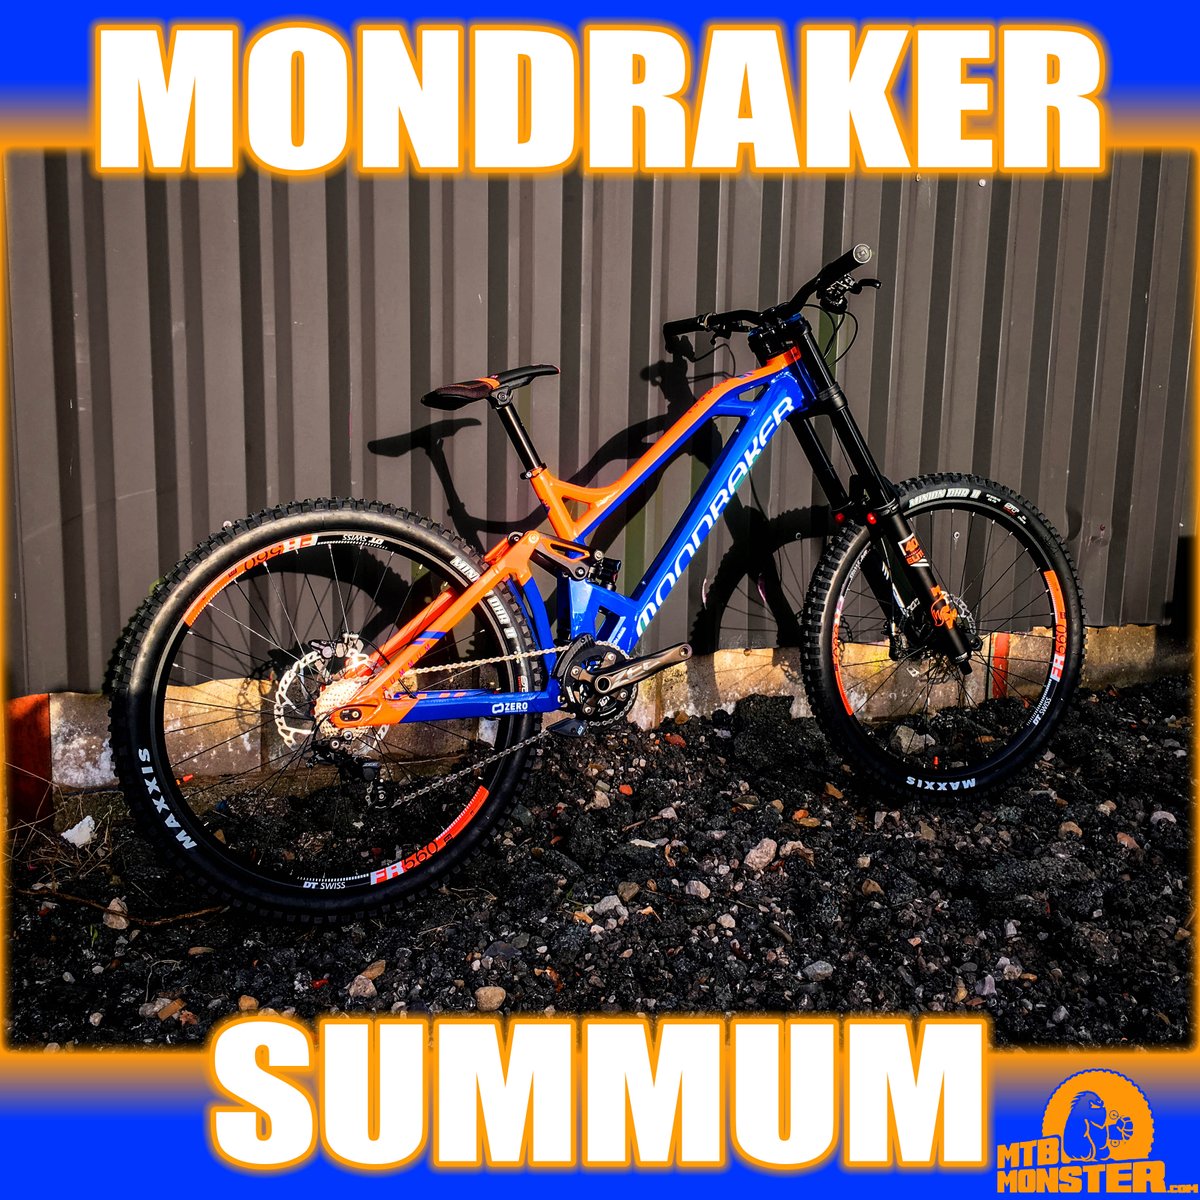 Check out this beastly Mondraker Summum Pro we have just built up! They've really nailed it with the colour scheme on this one!

#Mondraker #summum #mondrakersummum #mondrakersummumpro #dhbike #downhillbike #downhillmountainbike #mountainbike #mtbmonster #mtb #mondrakerdhbike